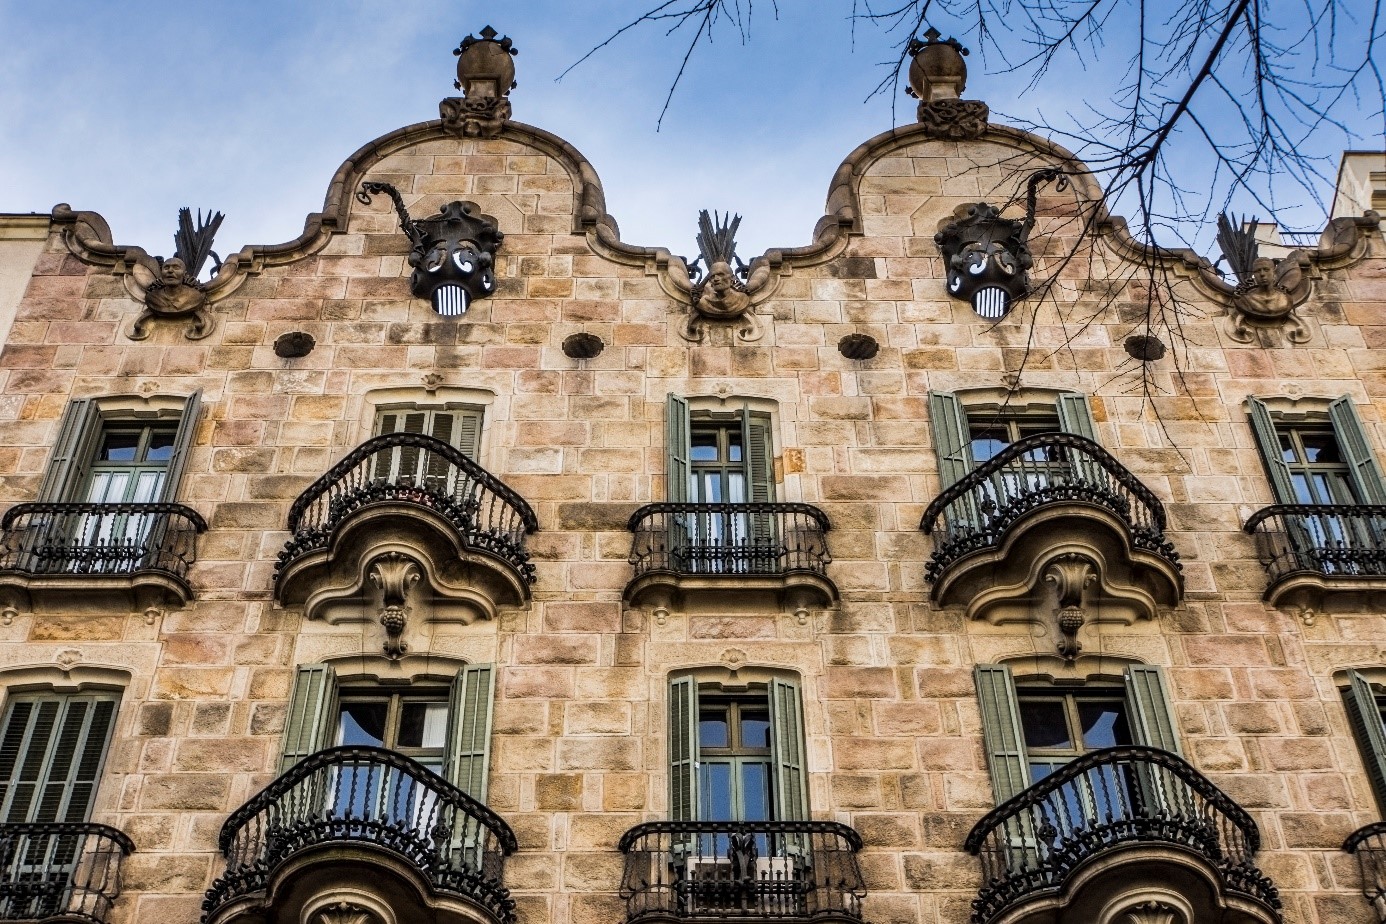 You must definitely see this conventional Gaudí house in Barcelona